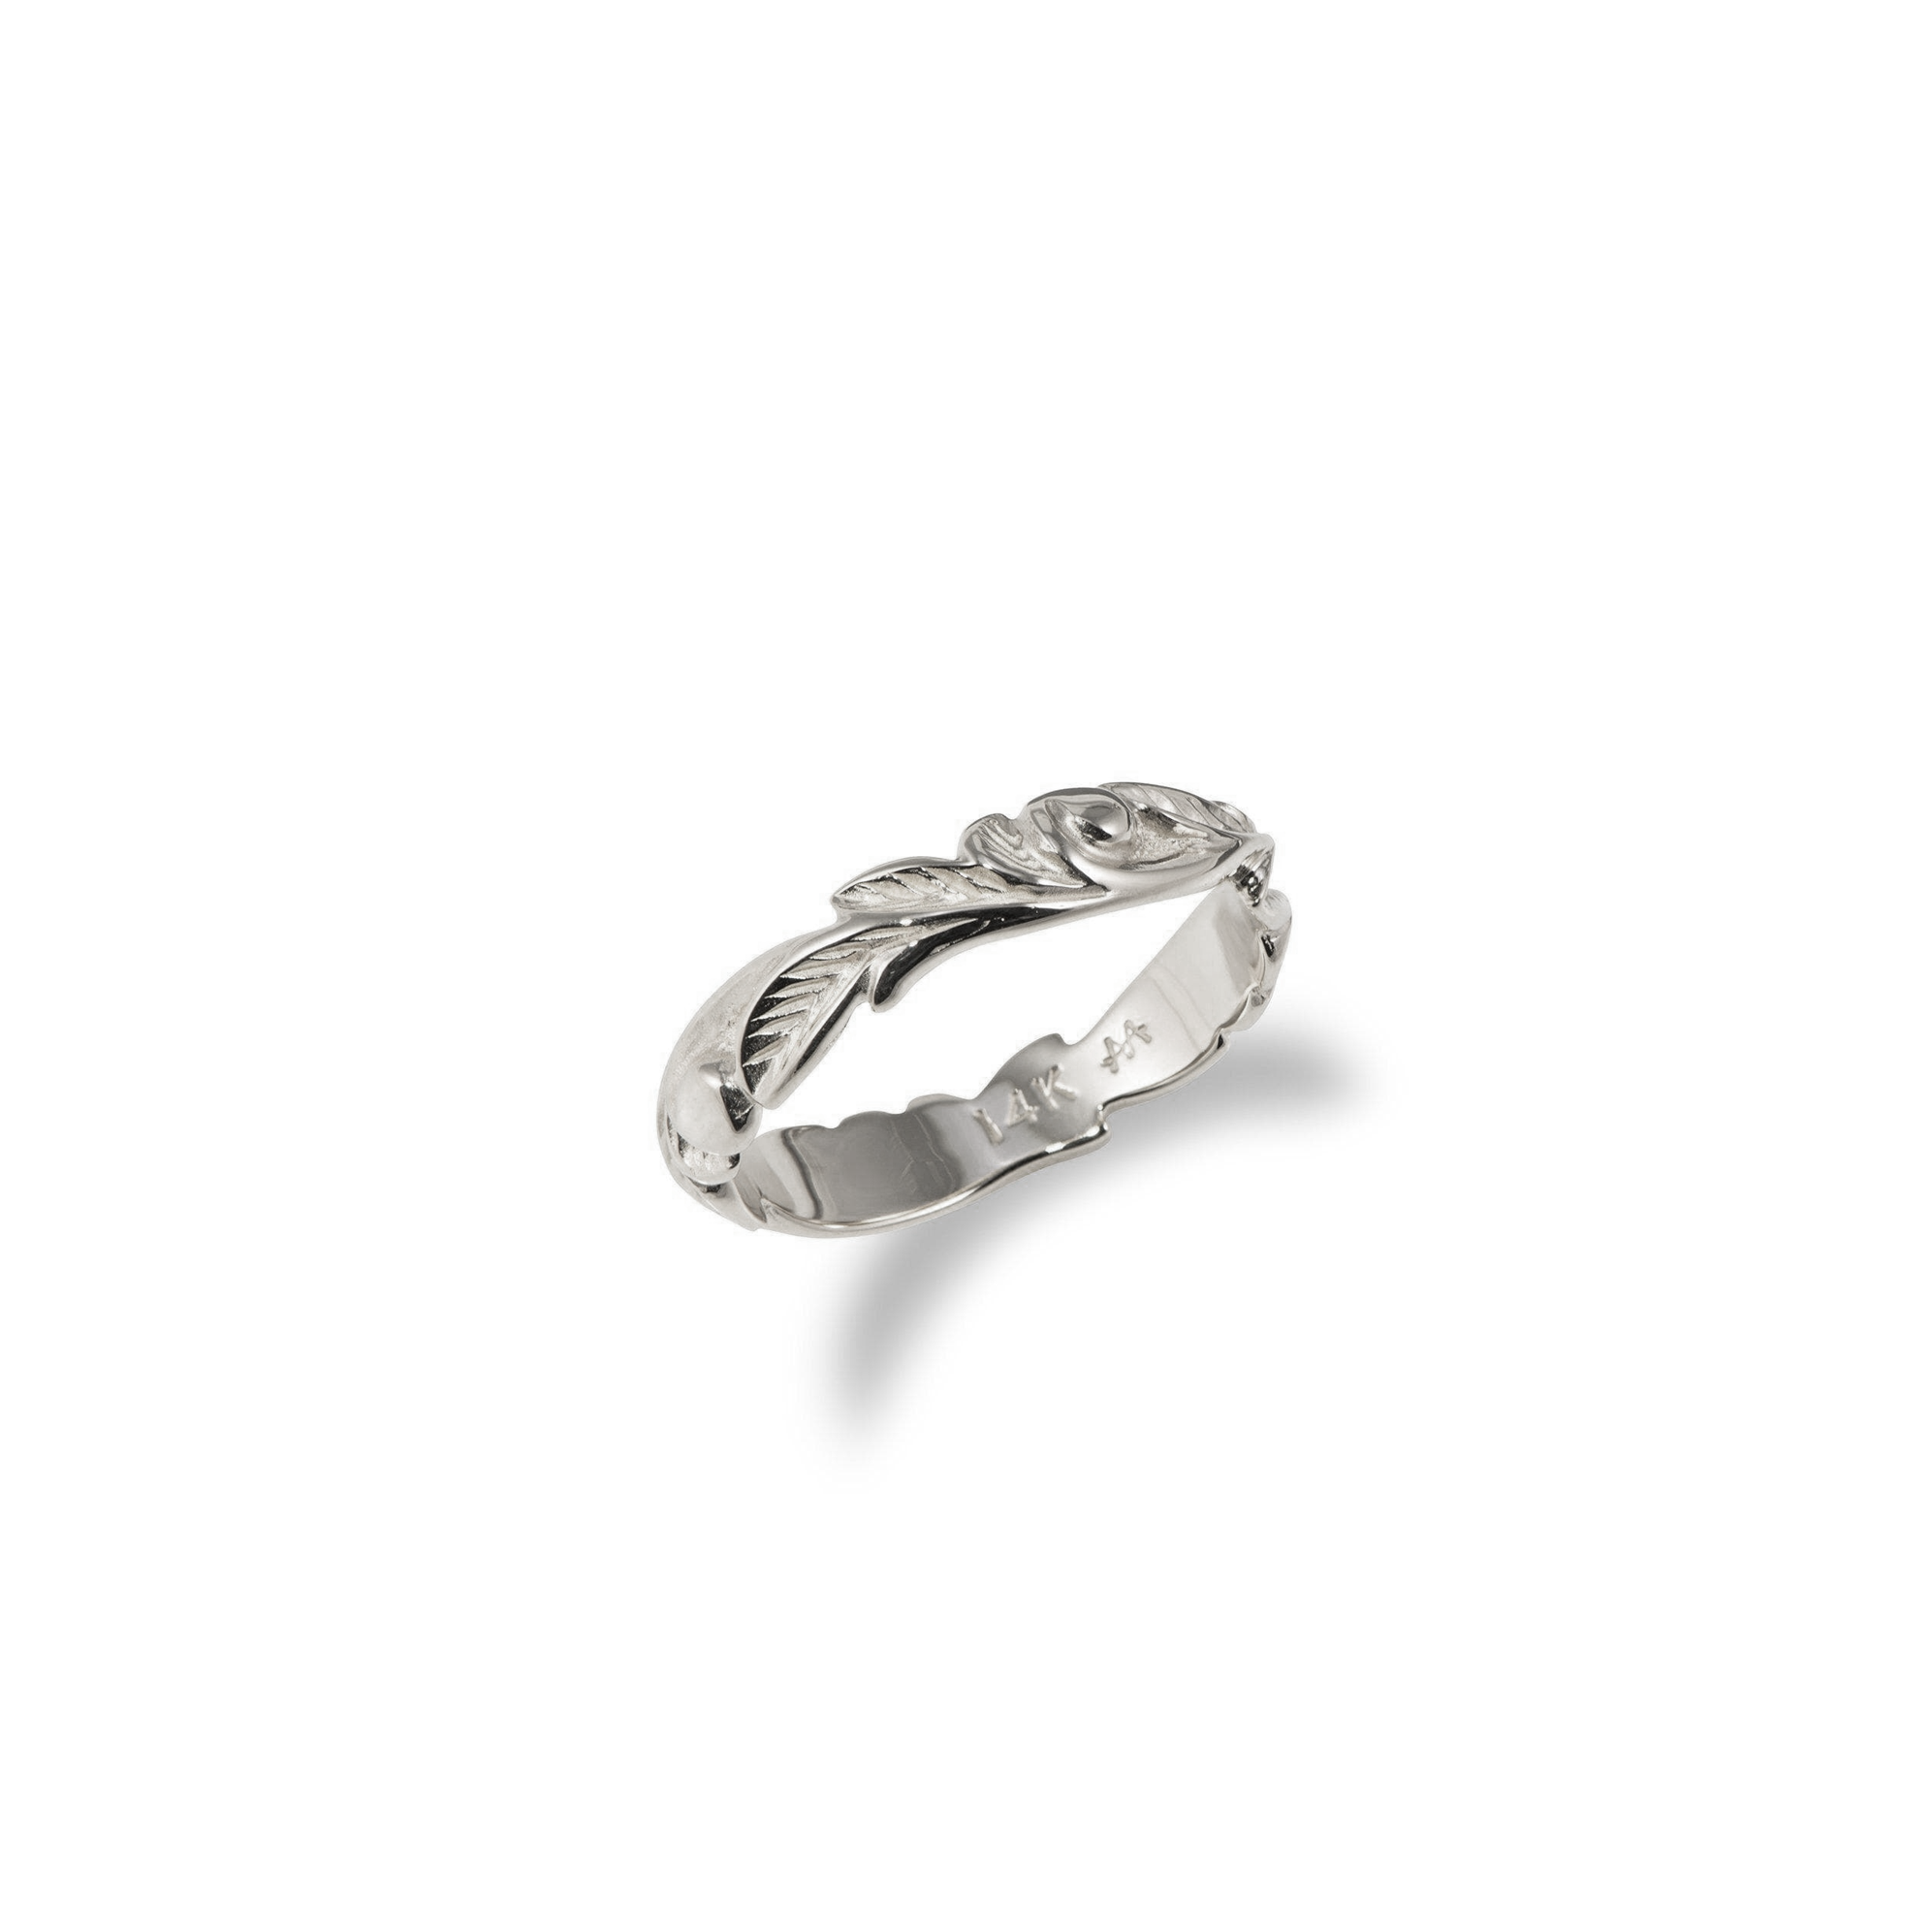 Hawaiian Heirloom Old English Scroll Ring in White Gold - 3mm